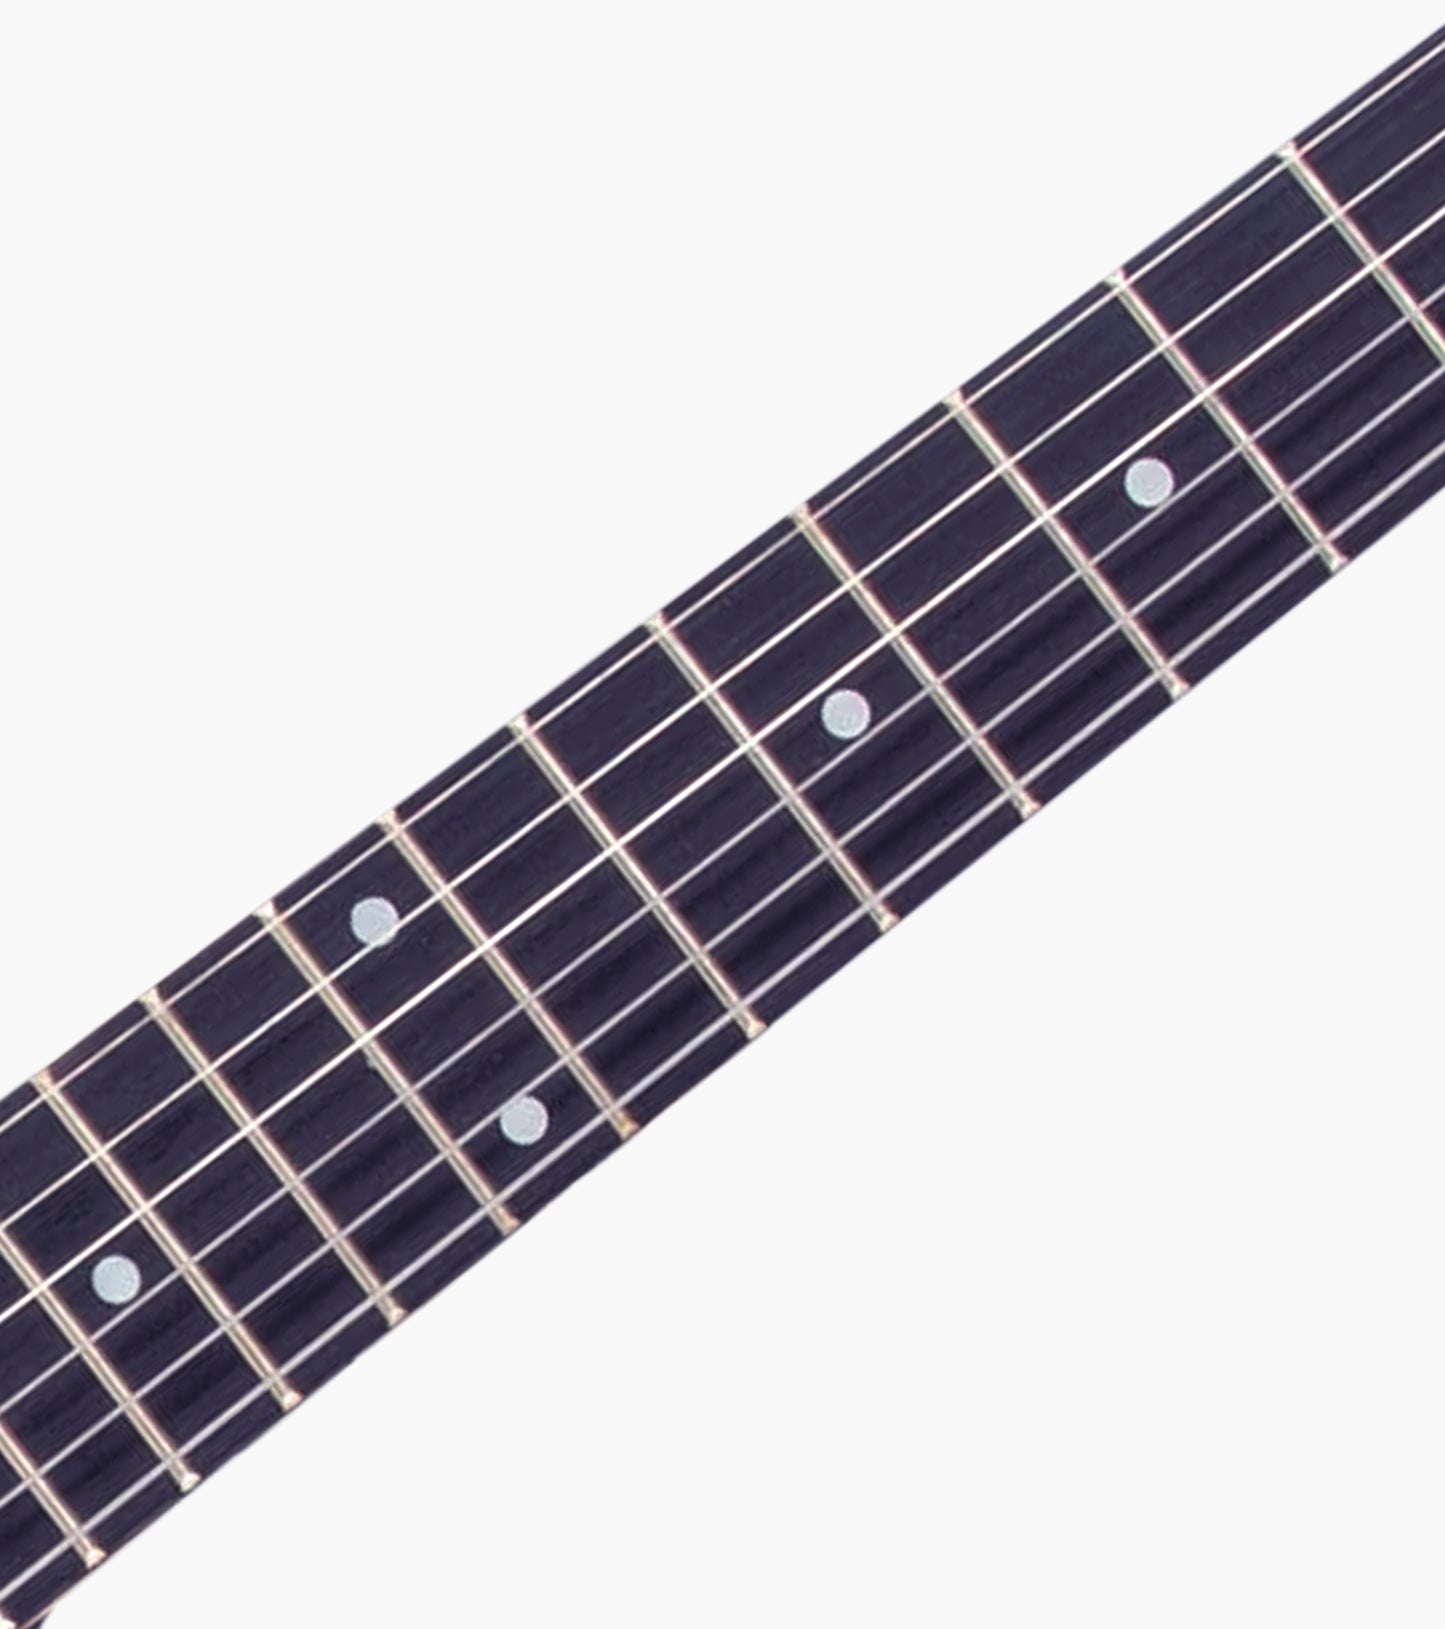 close-up of Blue double-cutaway beginner electric guitar fretboard